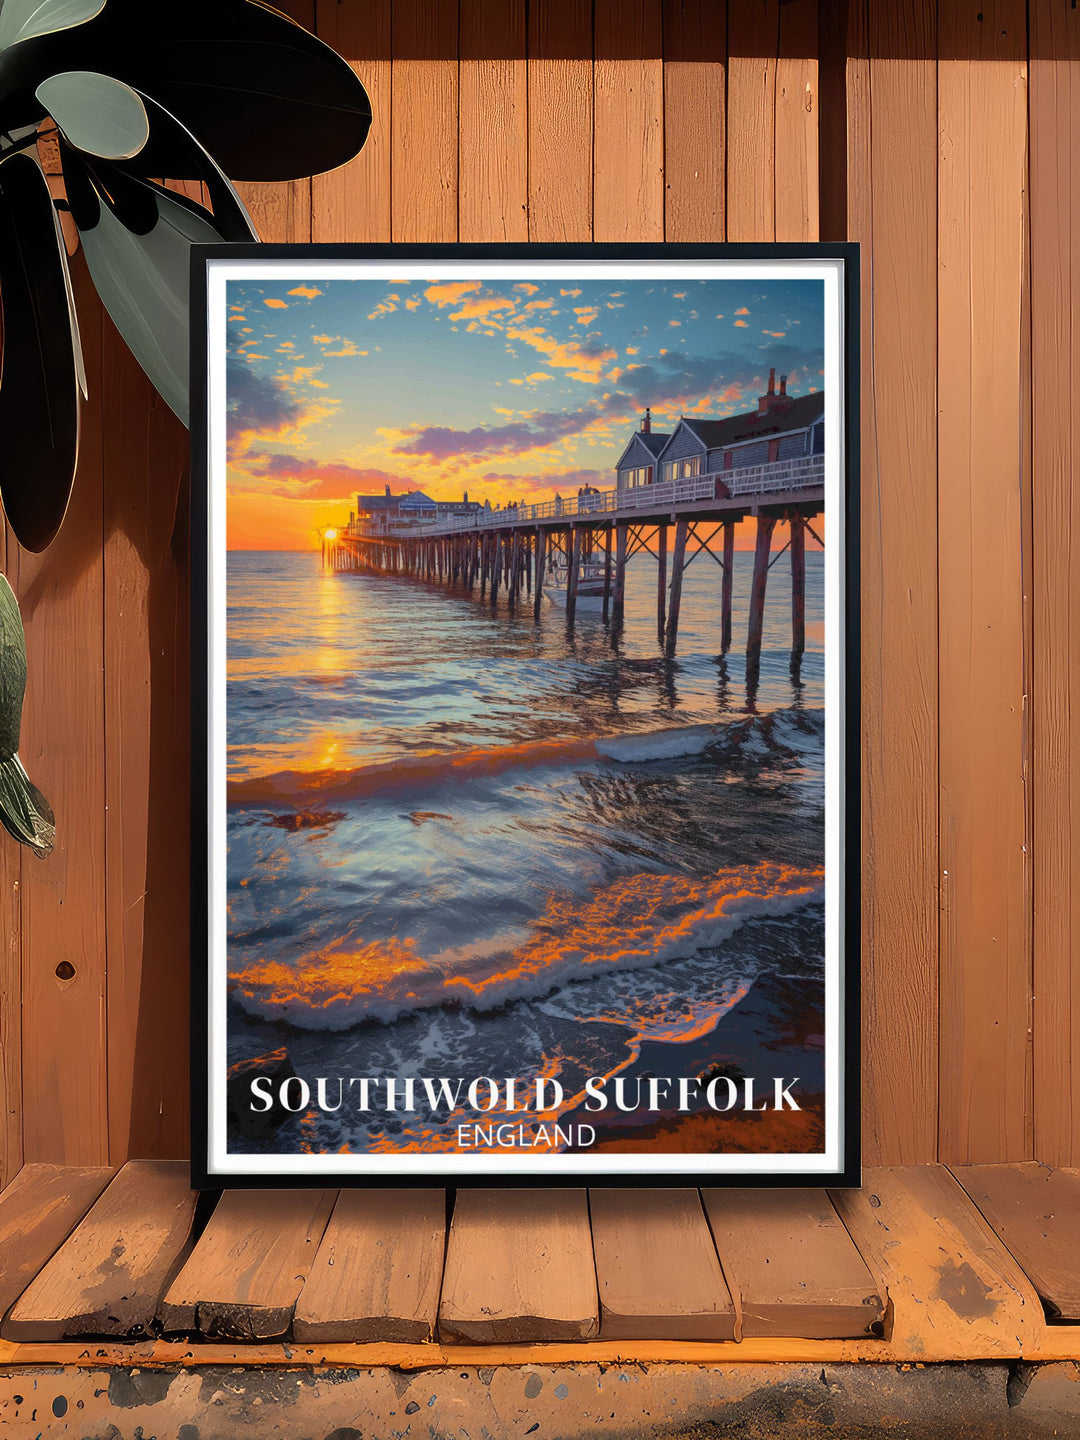 Southwold Print featuring detailed illustrations of the Southwold Lighthouse beach huts and picturesque Pier perfect for enhancing your home with a touch of coastal beauty from Suffolk and celebrating your love for UK travel